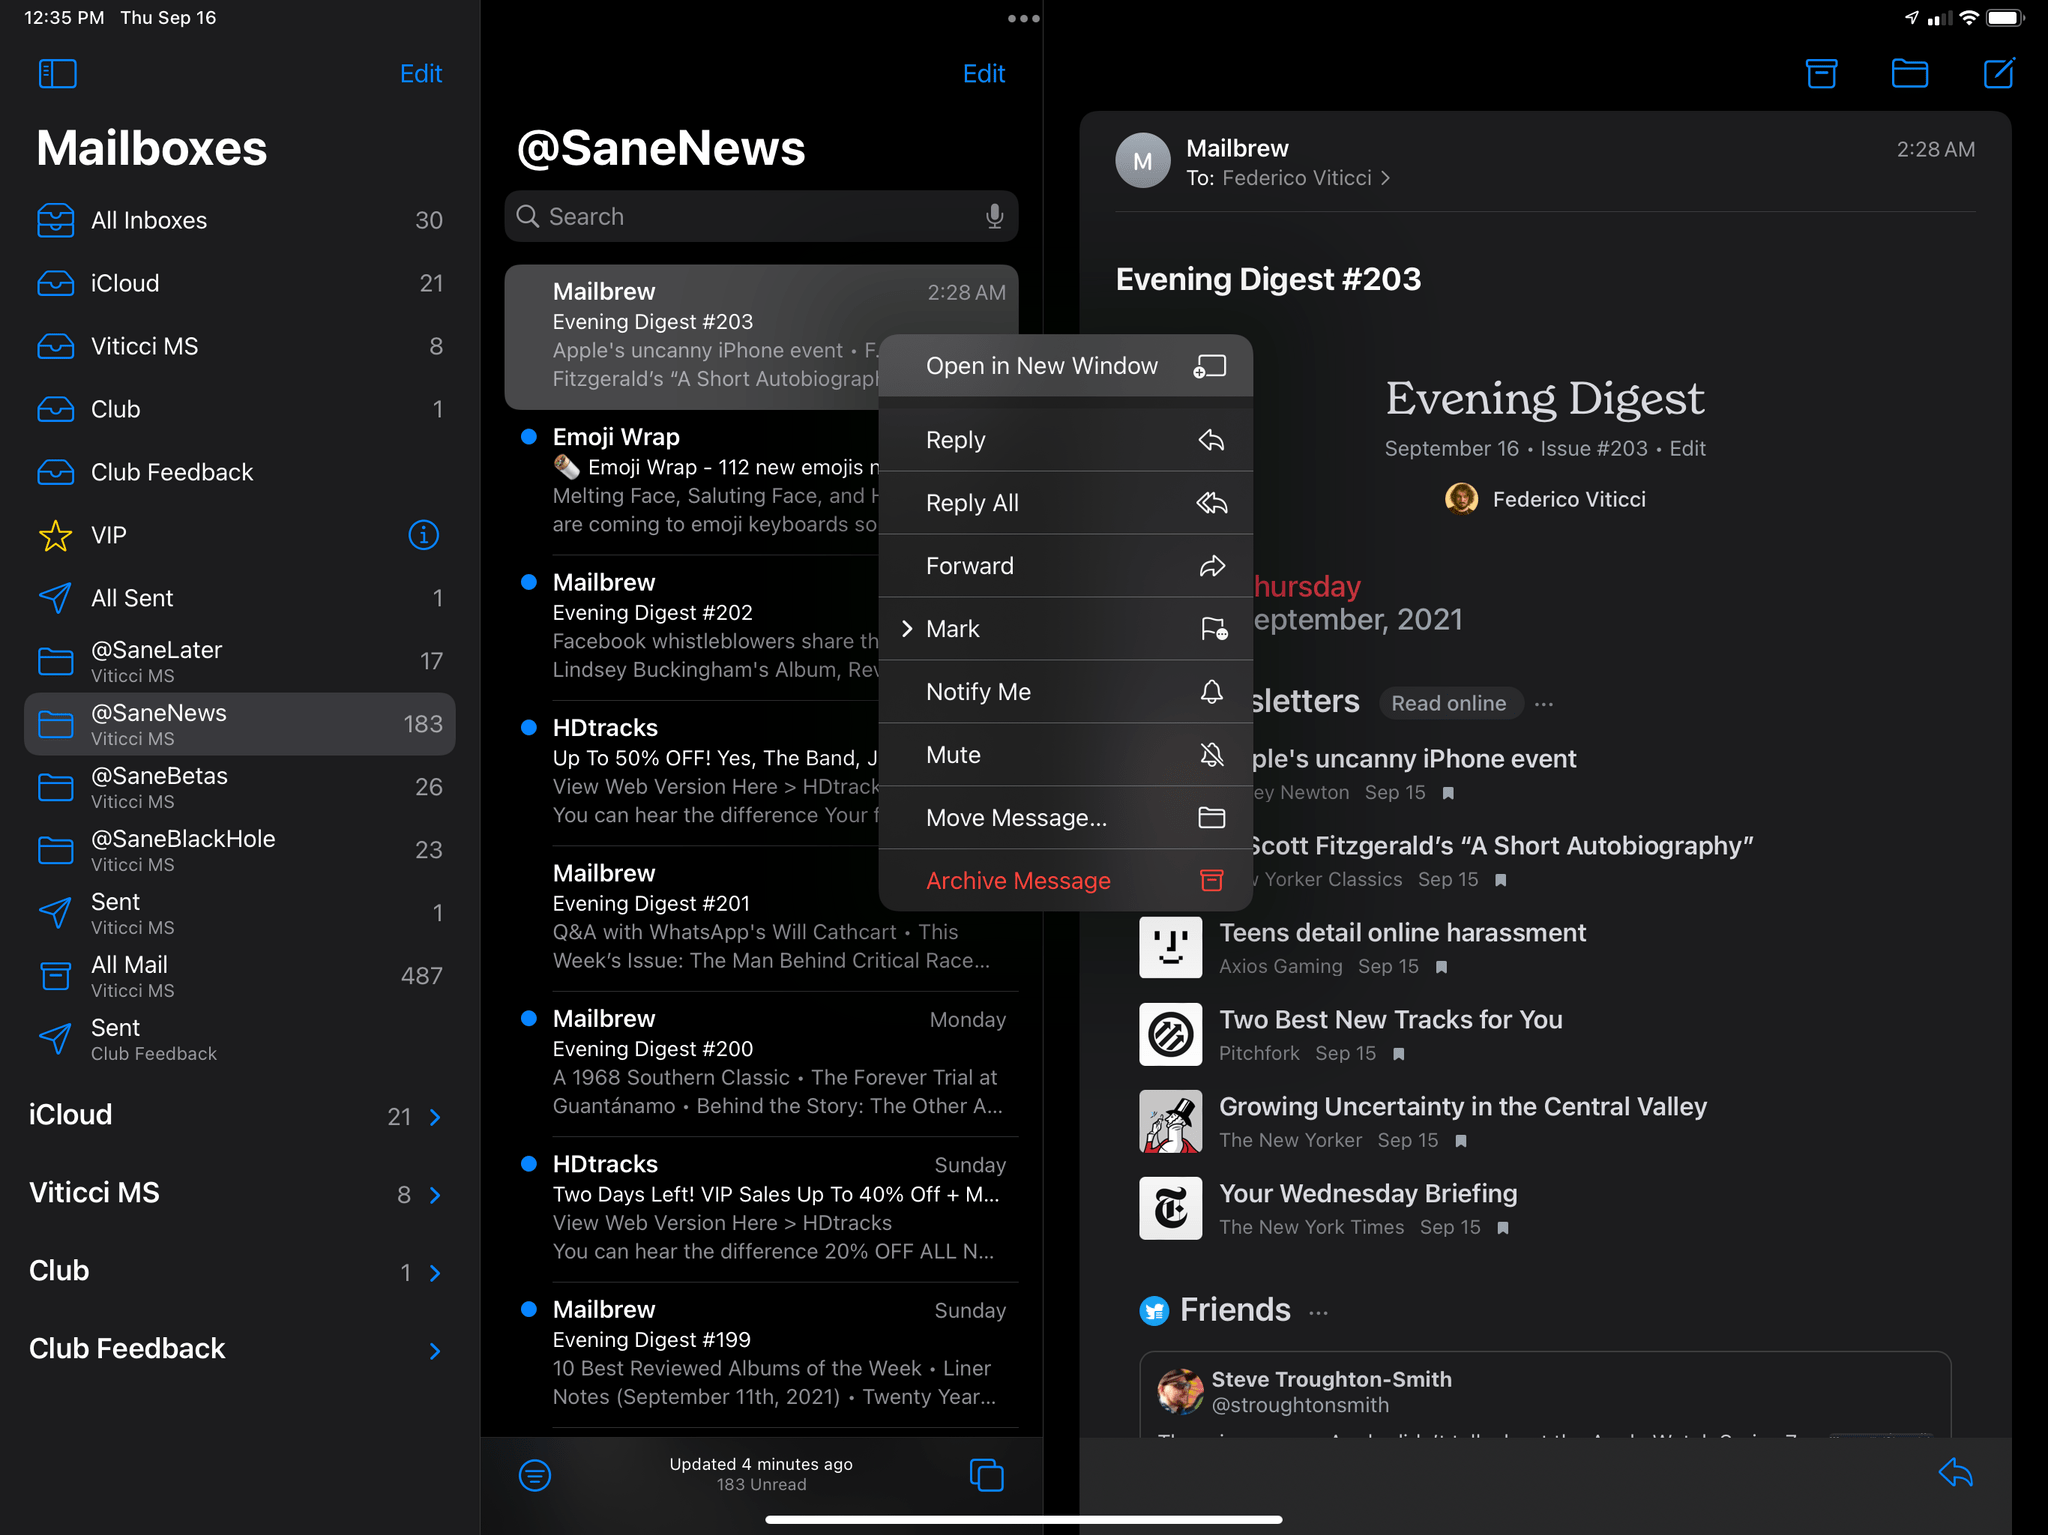 The standard 'Open in New Window' button can open center windows in iPadOS 15.